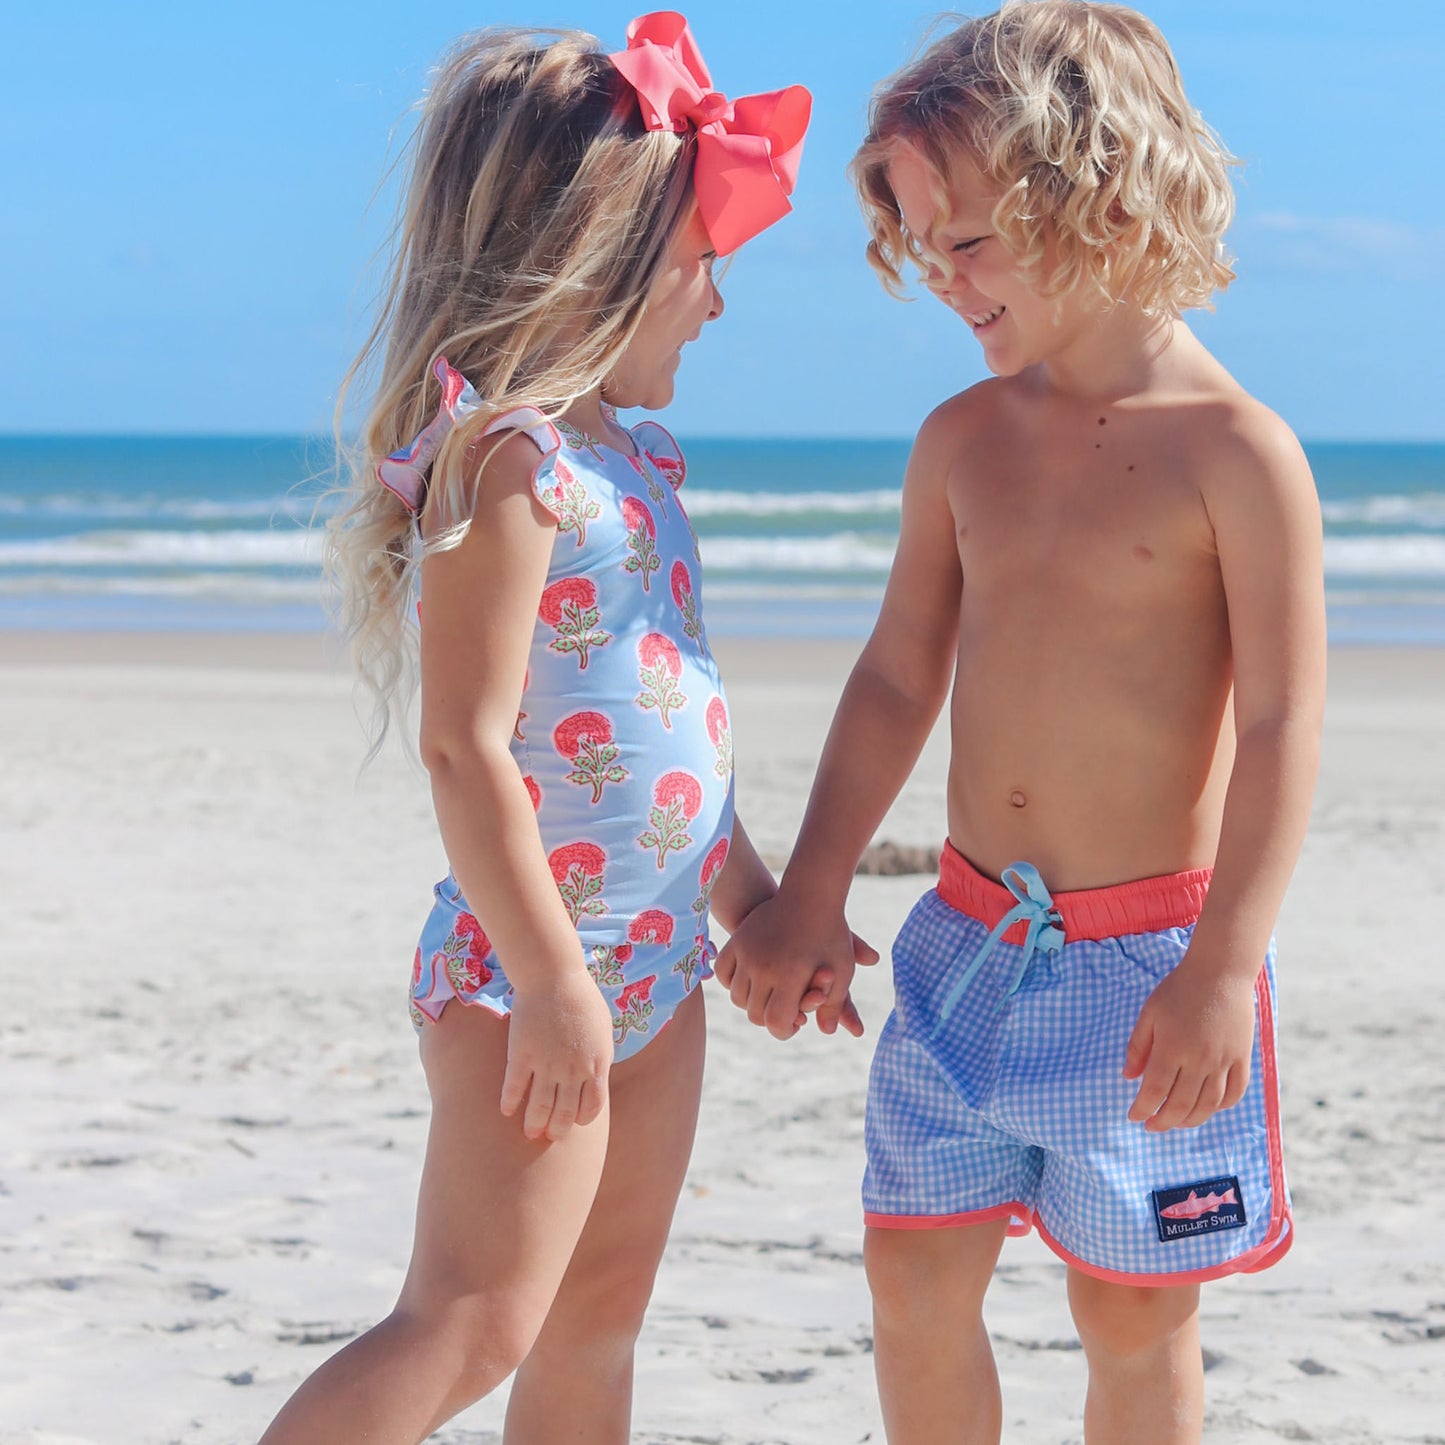 brother and sister holding hands on the beach